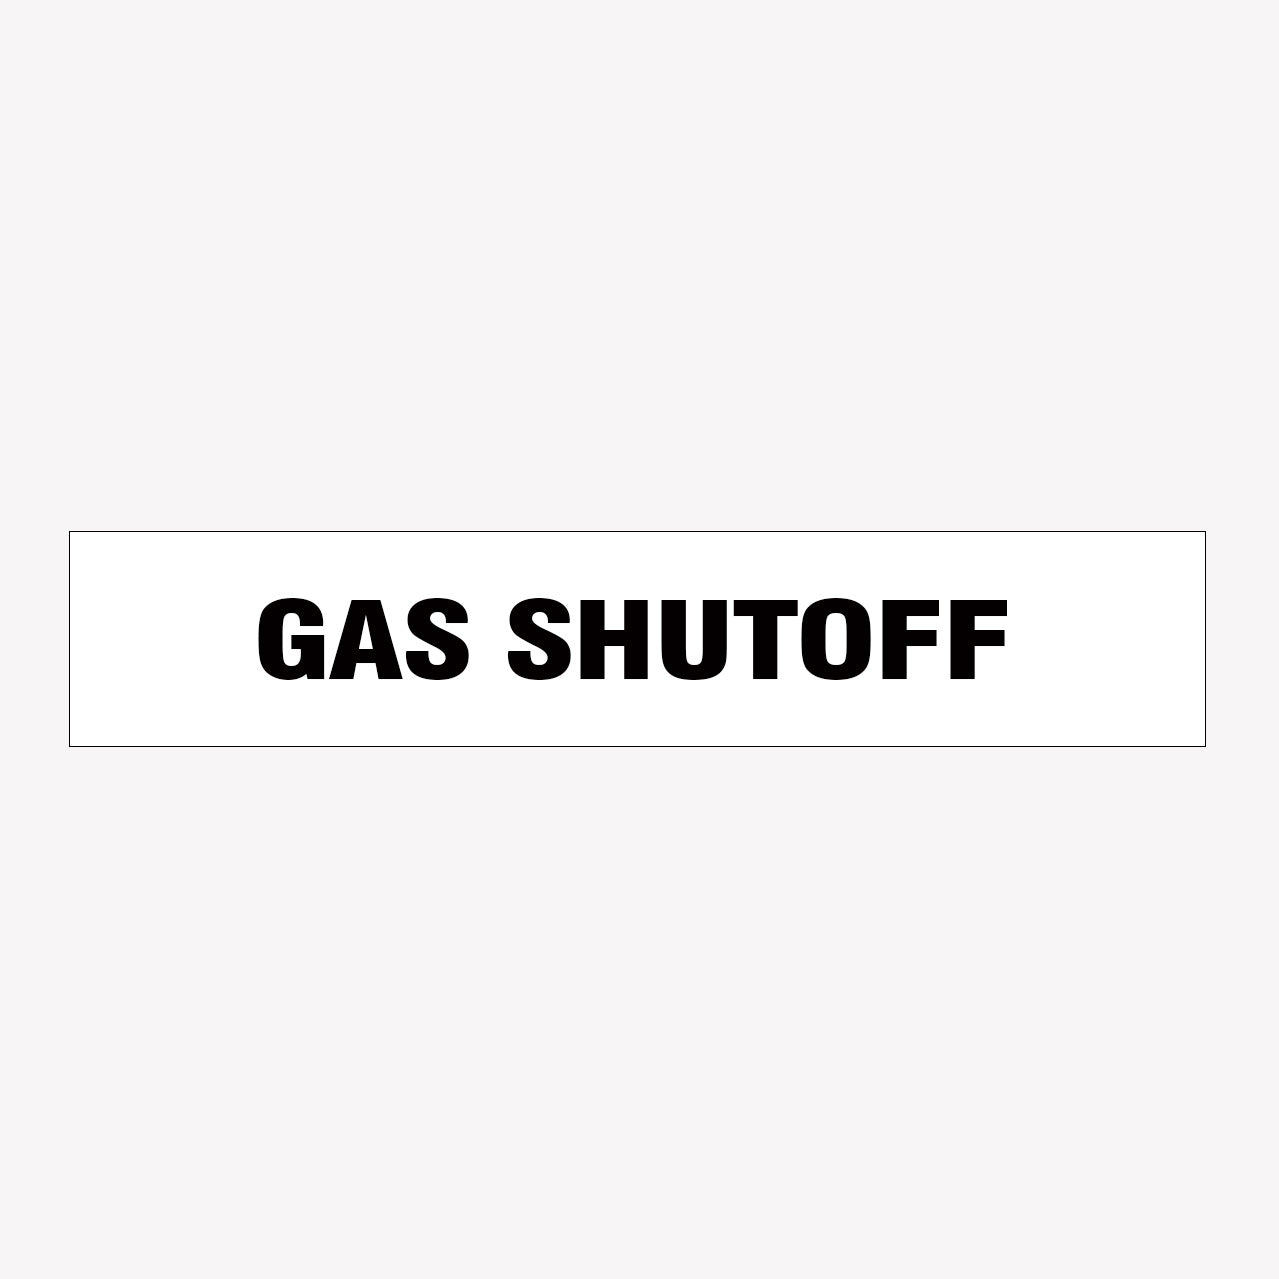 GAS SHUTOFF SIGN - STATUTORY SIGNS IN AUSTRALIA - FAST SHIPPING  - SHOP ONLINE AT GET SIGNS